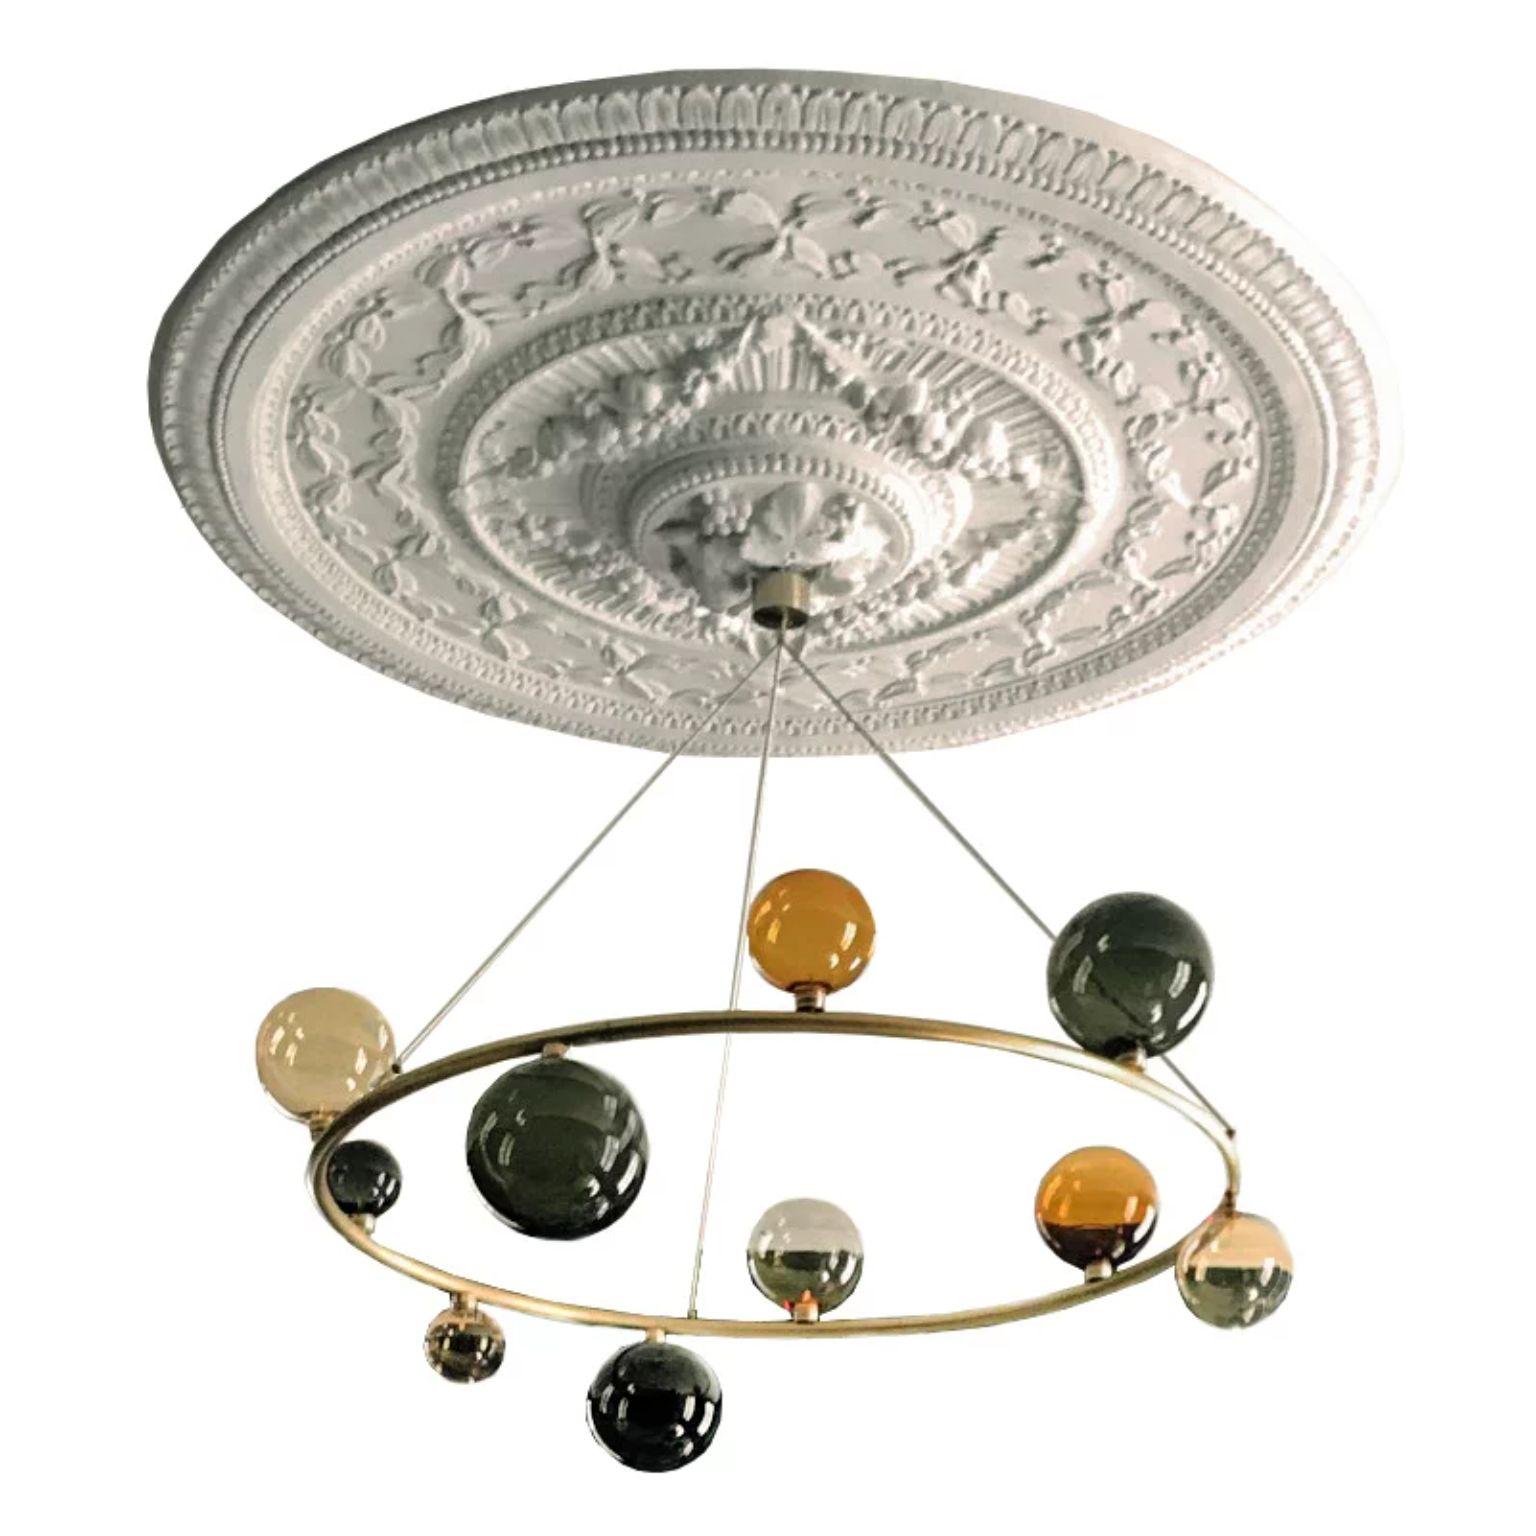 Cosmos ceiling lighting by Emilie Lemardeley
Dimensions: D 110 x H 70 cm
Materials: Brushed brass, 10 glass spheres.
Weight: 15 kg

The cosmos collection references to the old occidental belief that the Earth was the center of the universe.